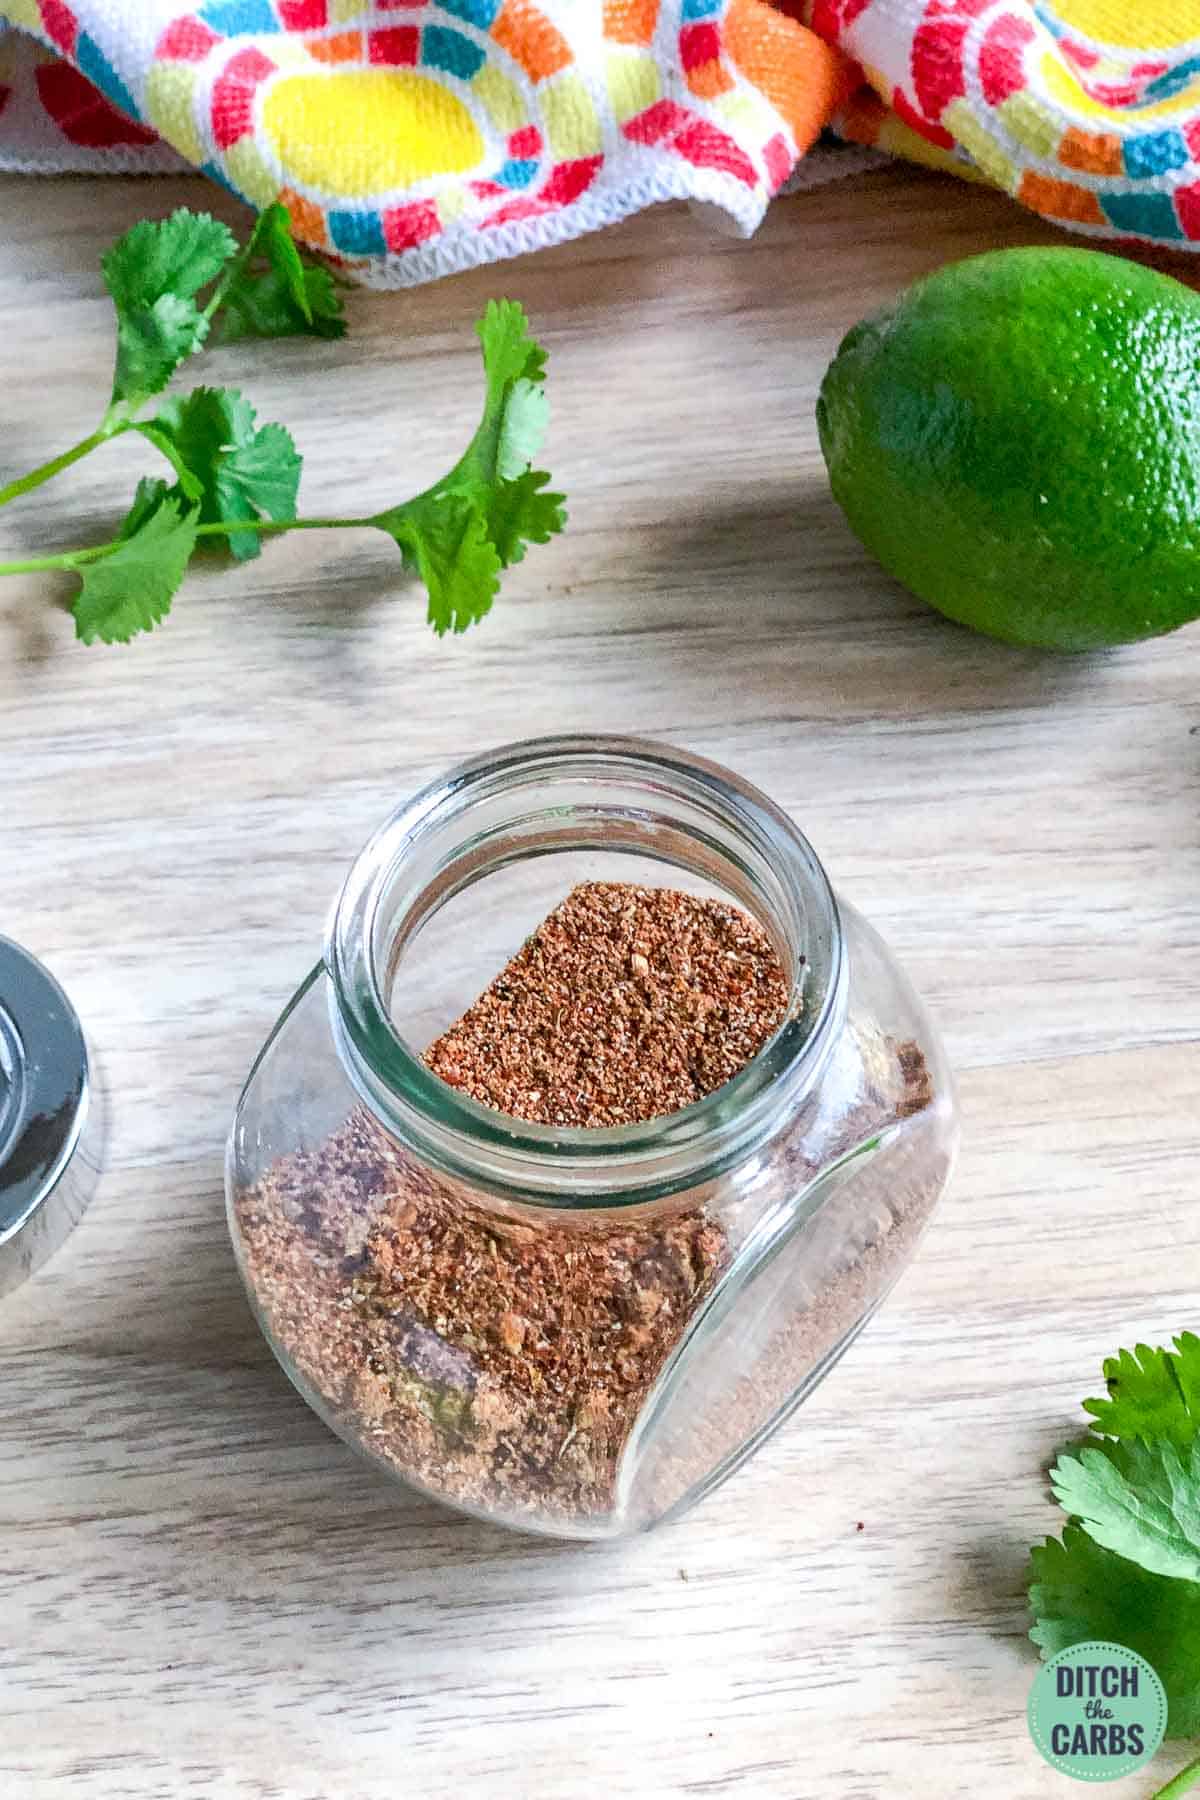 Glass jar filled with a homemade taco seasoning blend